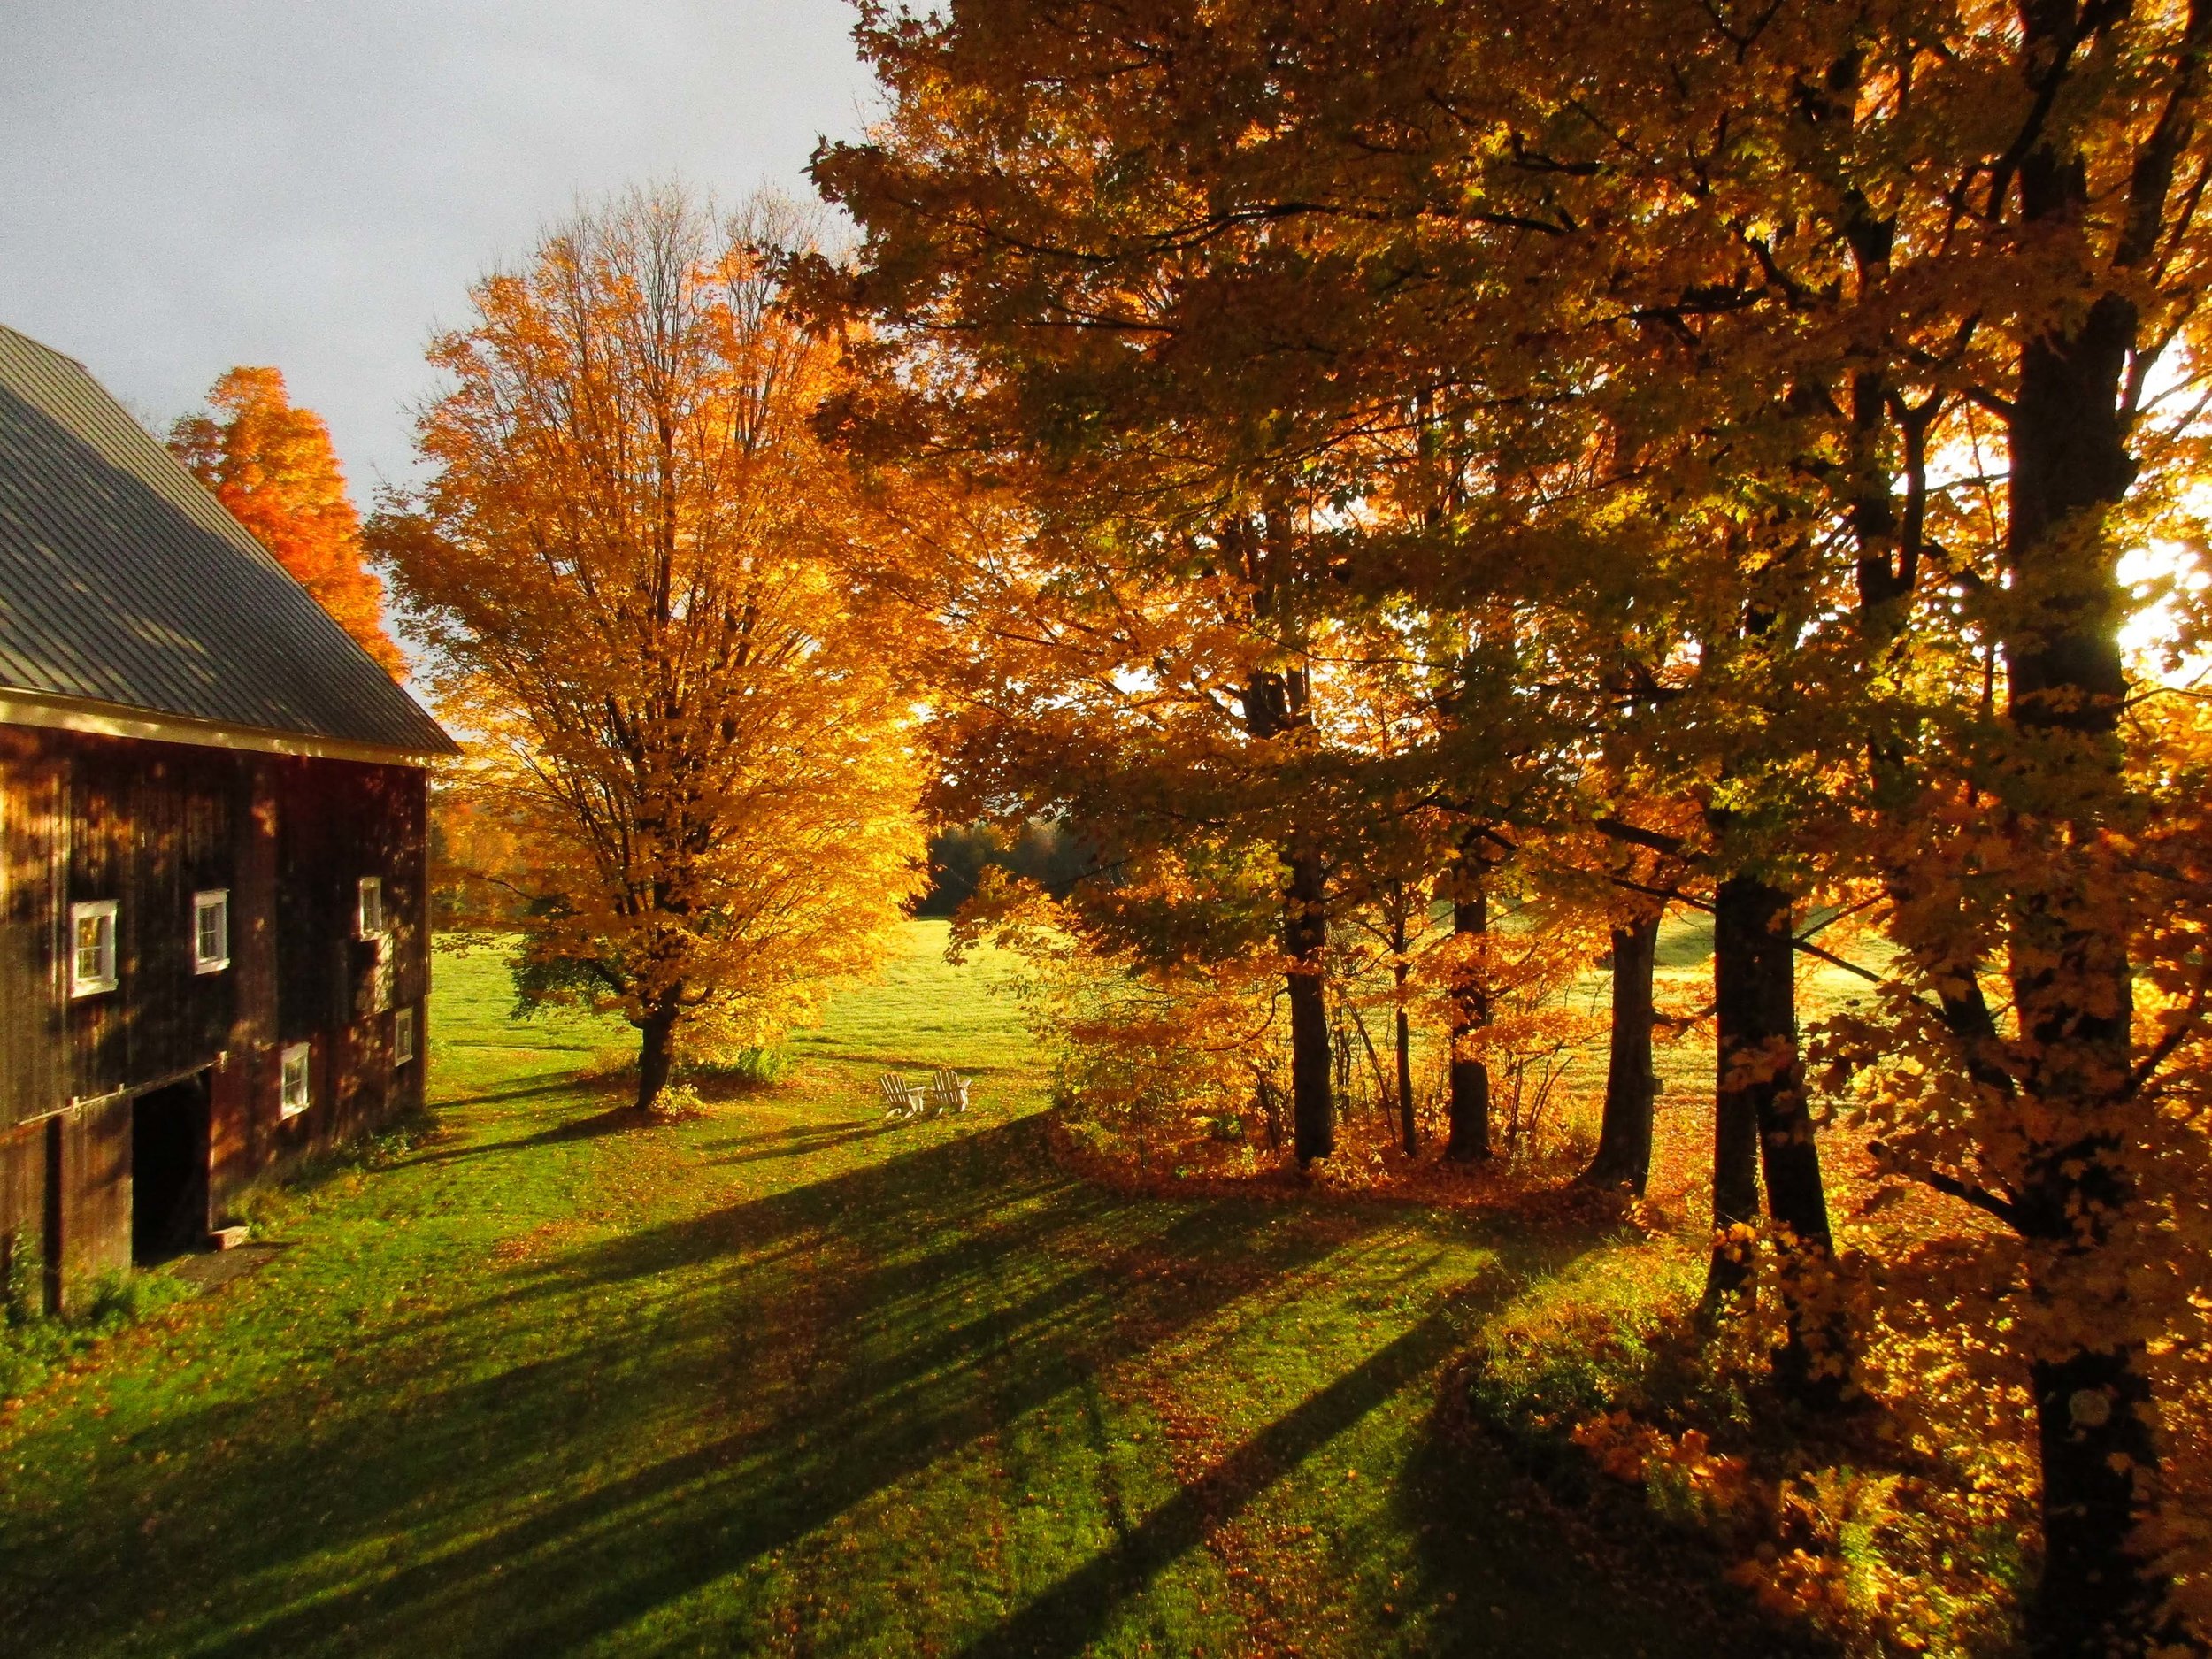 A barn in fall light with the leaves changing